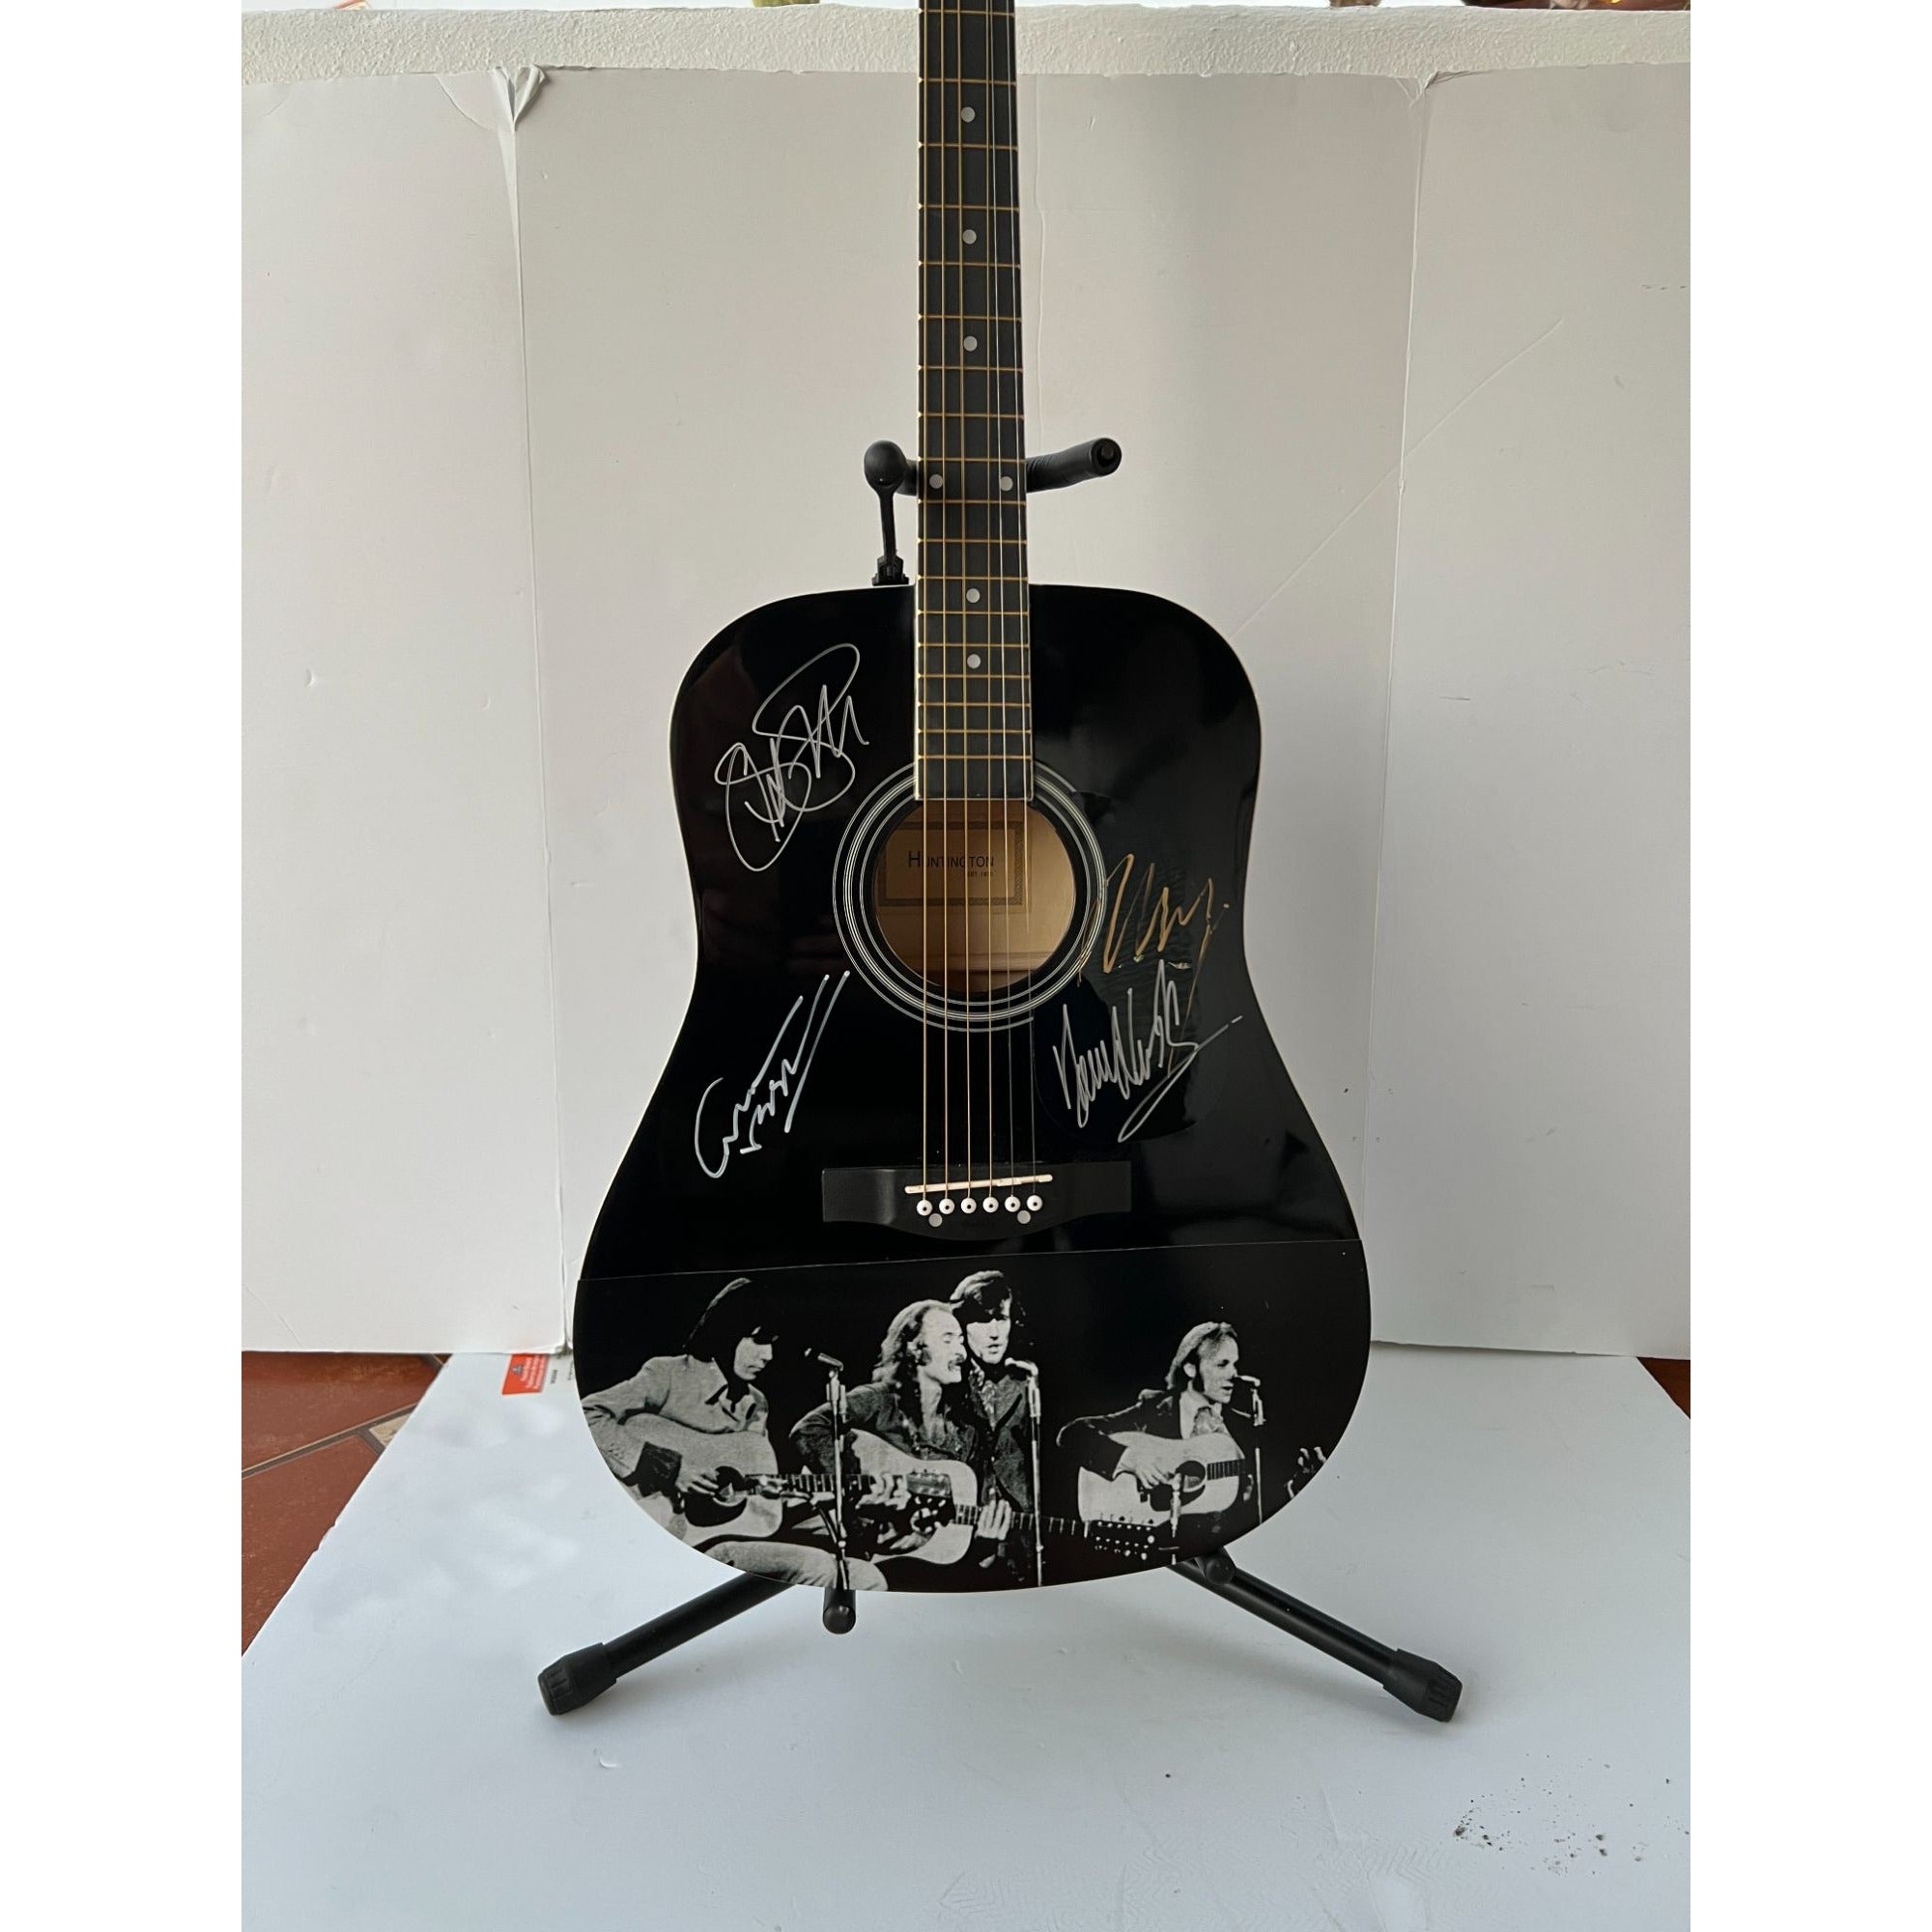 David Crosby Neil Young Graham Nash Stephan Stills CSNY one of a kind full size acoustic guitar signed with proof